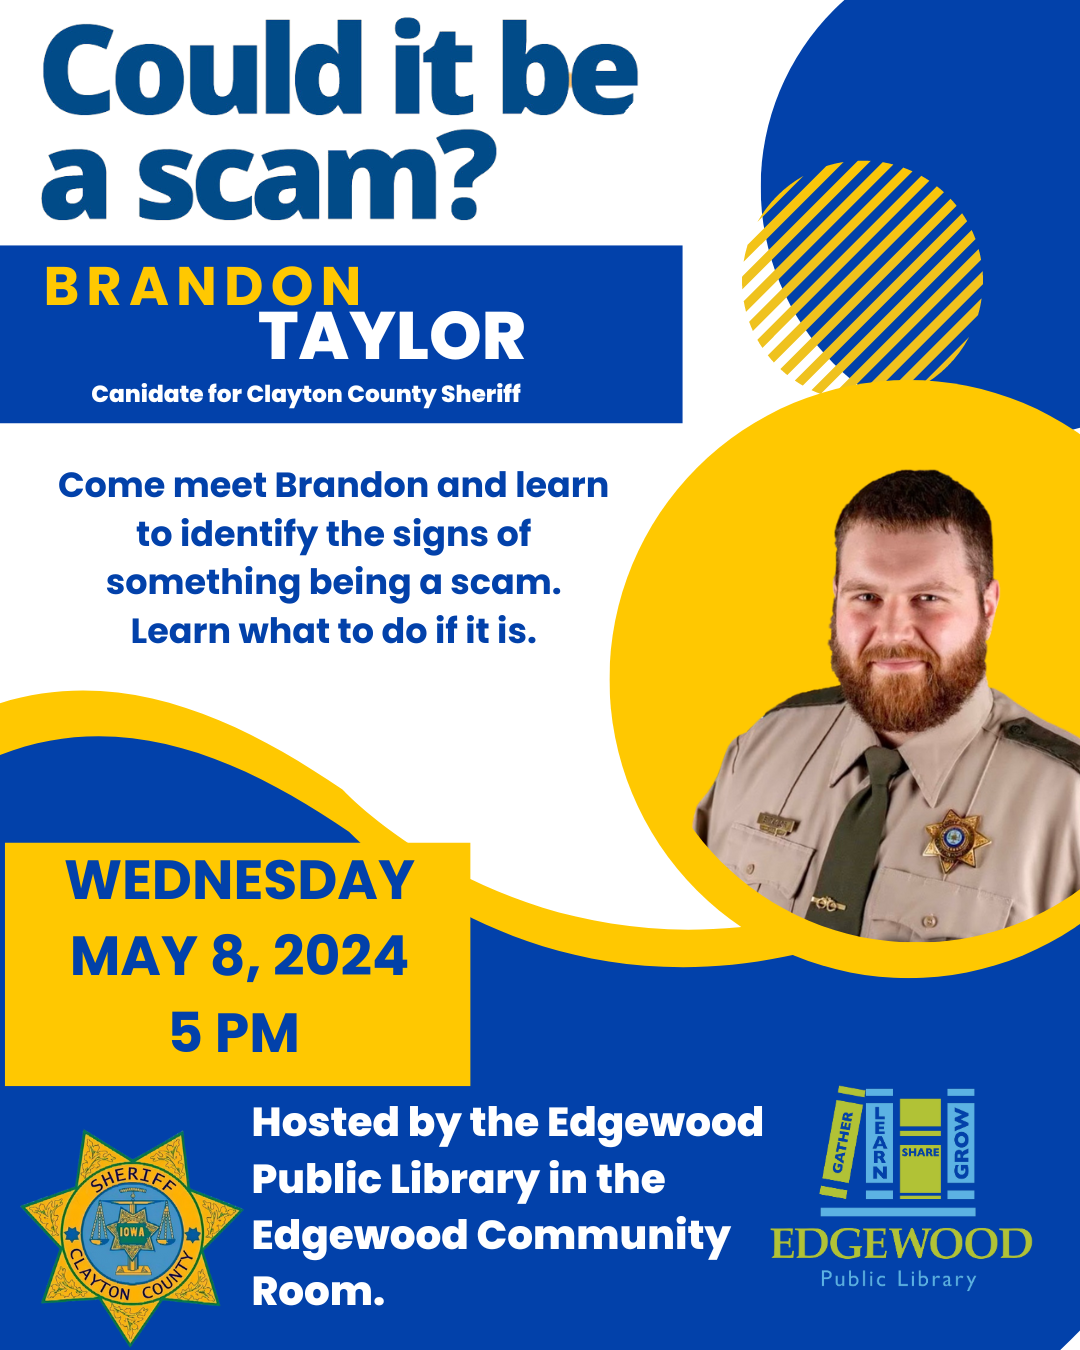 Scam Ed Flyer (1080 x 1350 px).png